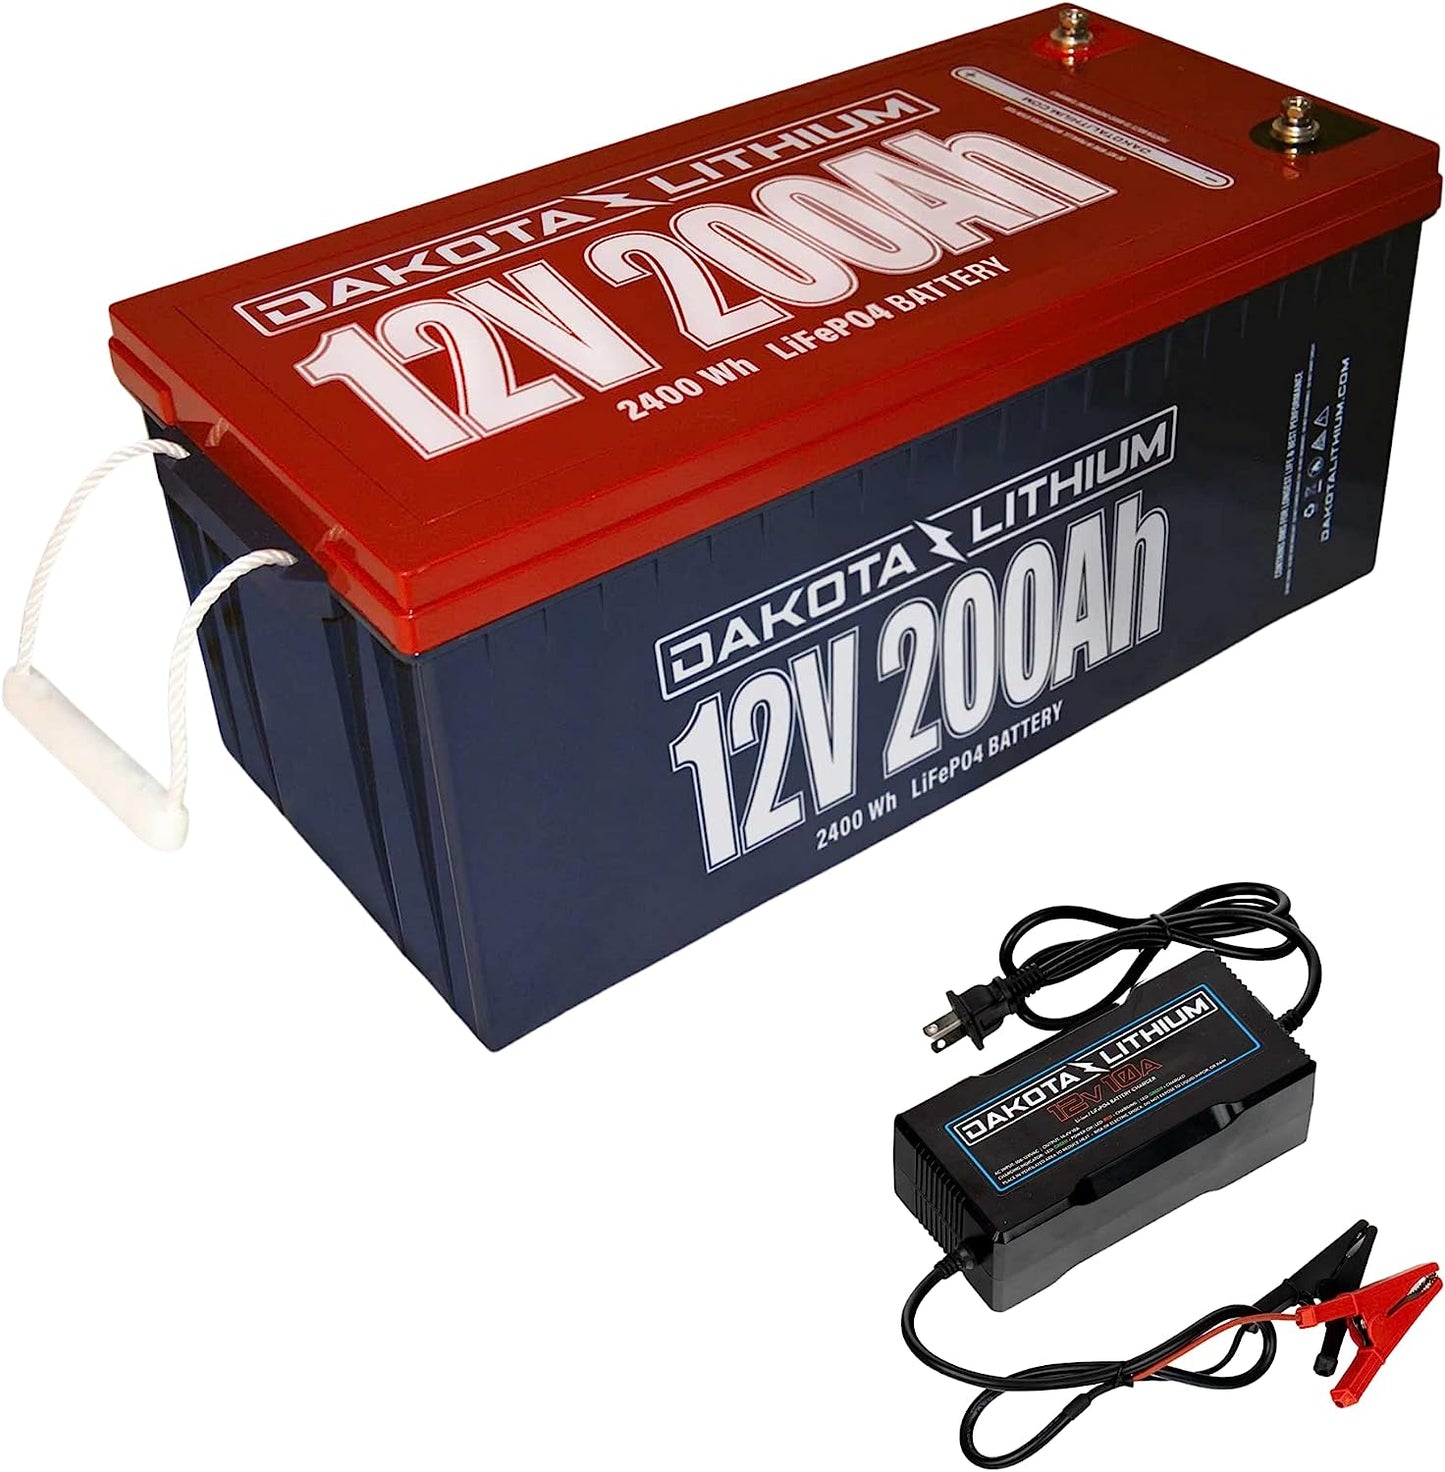 Dakota Lithium 12V 200Ah LiFePO4 Deep Cycle Battery with Charger